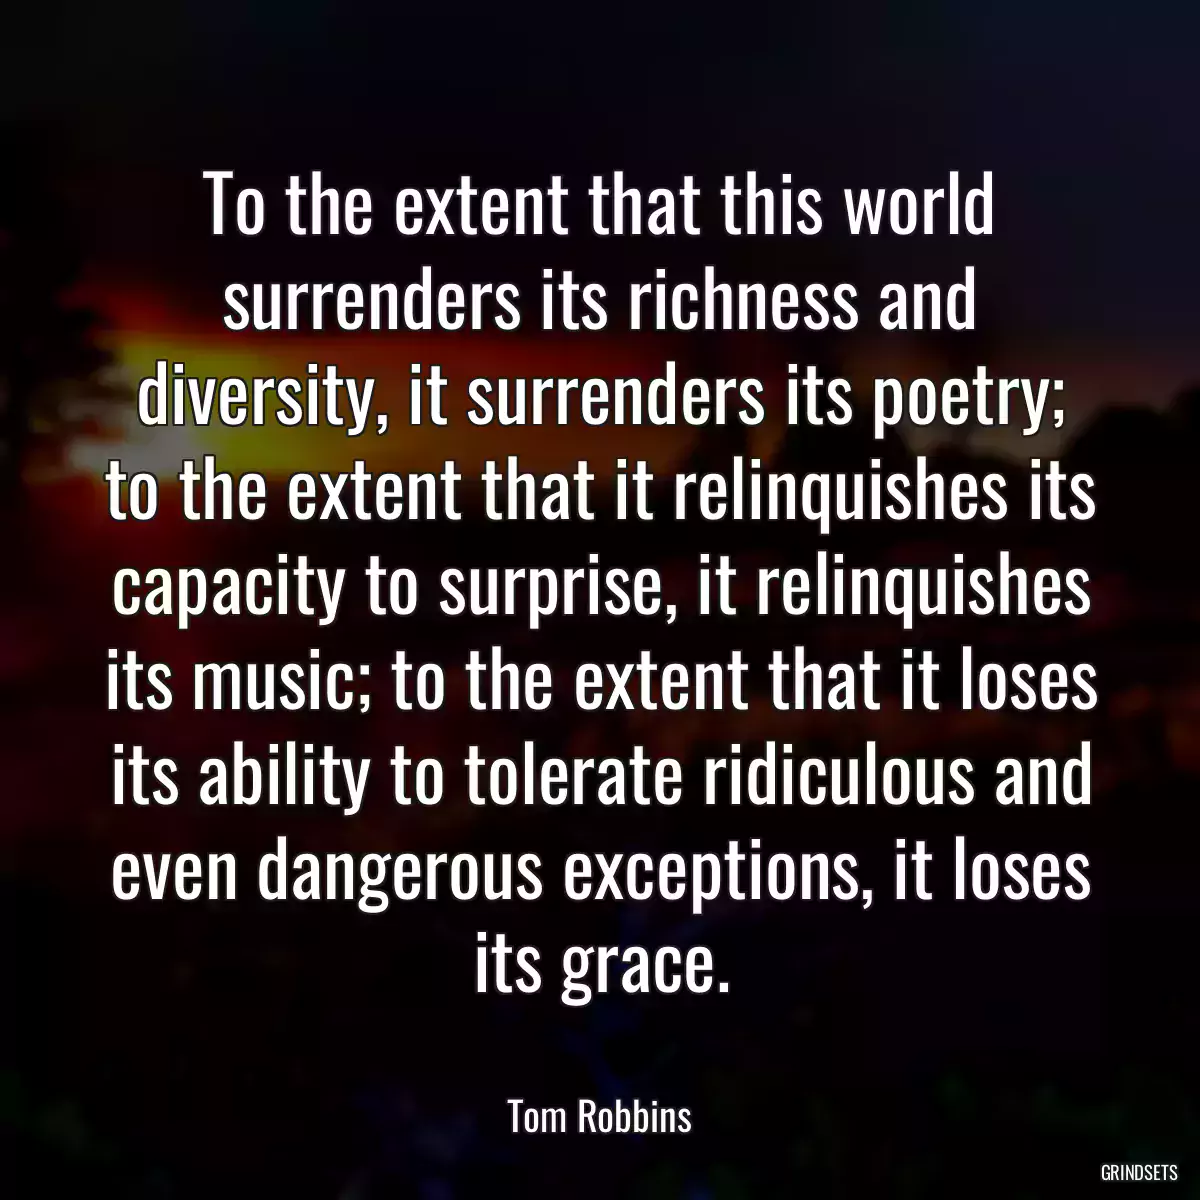 To the extent that this world surrenders its richness and diversity, it surrenders its poetry; to the extent that it relinquishes its capacity to surprise, it relinquishes its music; to the extent that it loses its ability to tolerate ridiculous and even dangerous exceptions, it loses its grace.